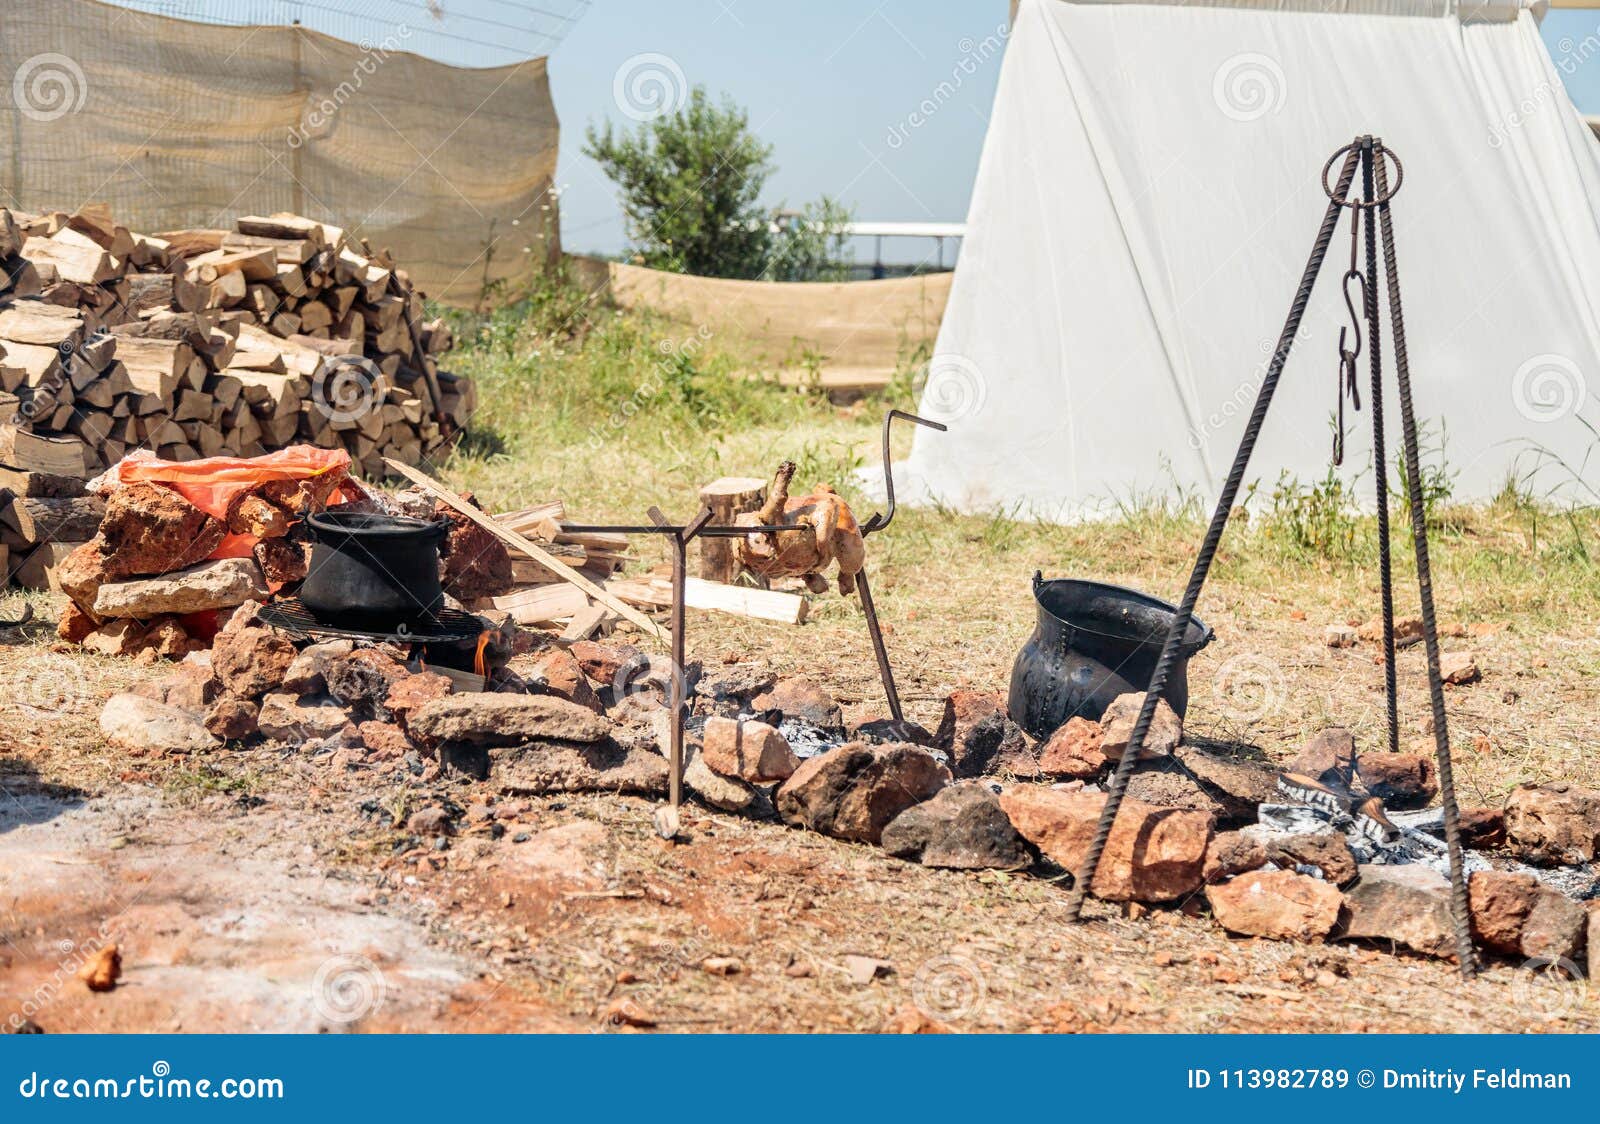 Preparation Food In Marching Conditions At The Knight Festival In Goren Park In Israel Stock